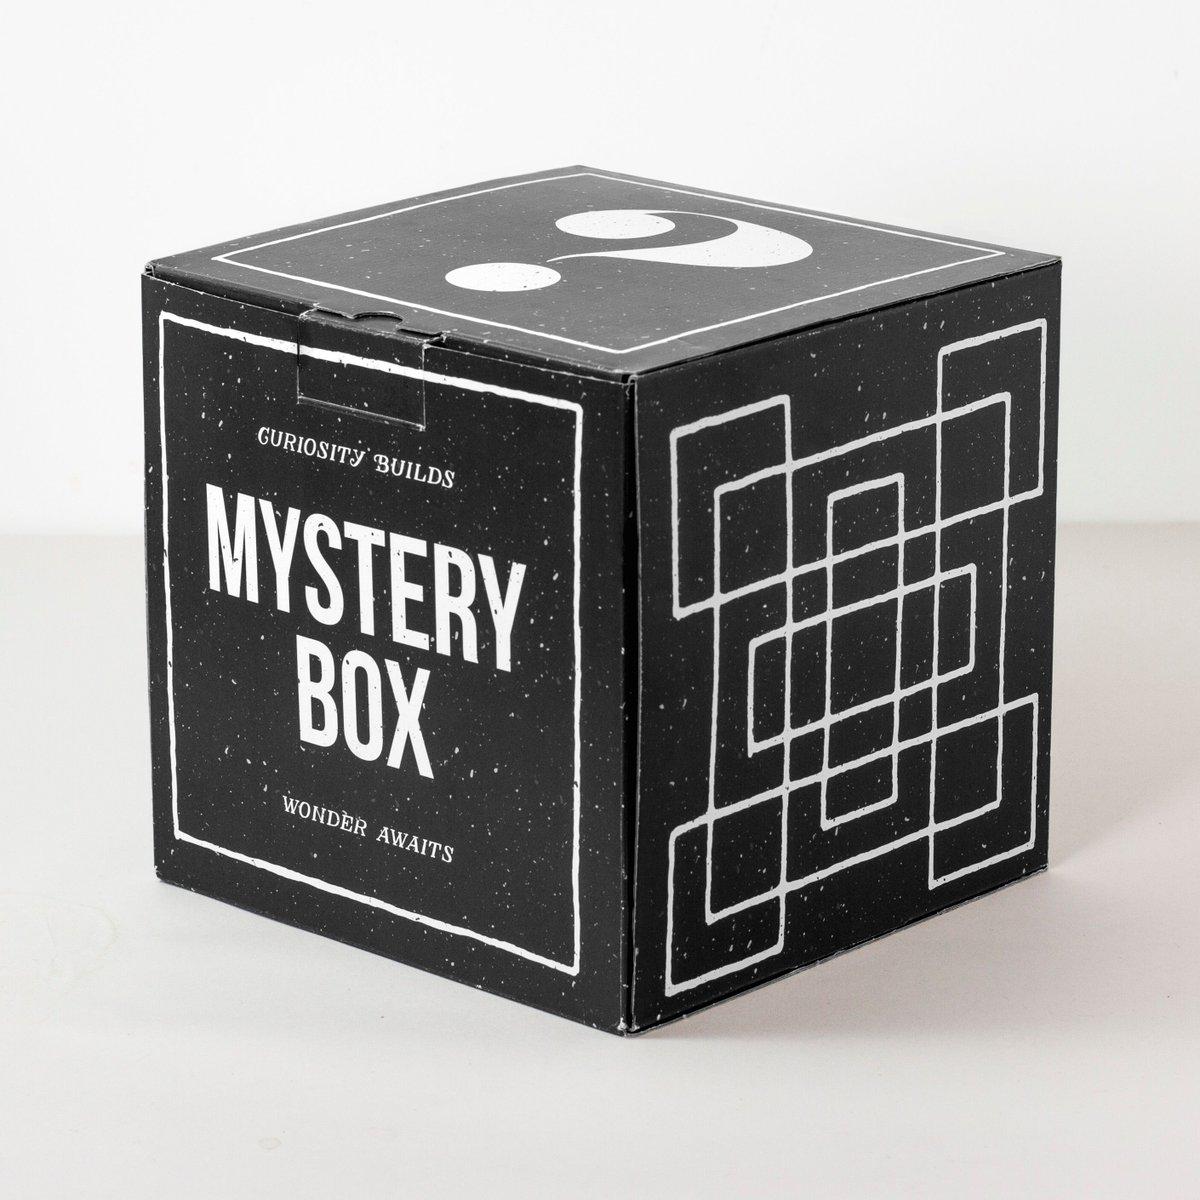 Click to read reviews and features, buy Authentic Luxury Items Mystery Box ...